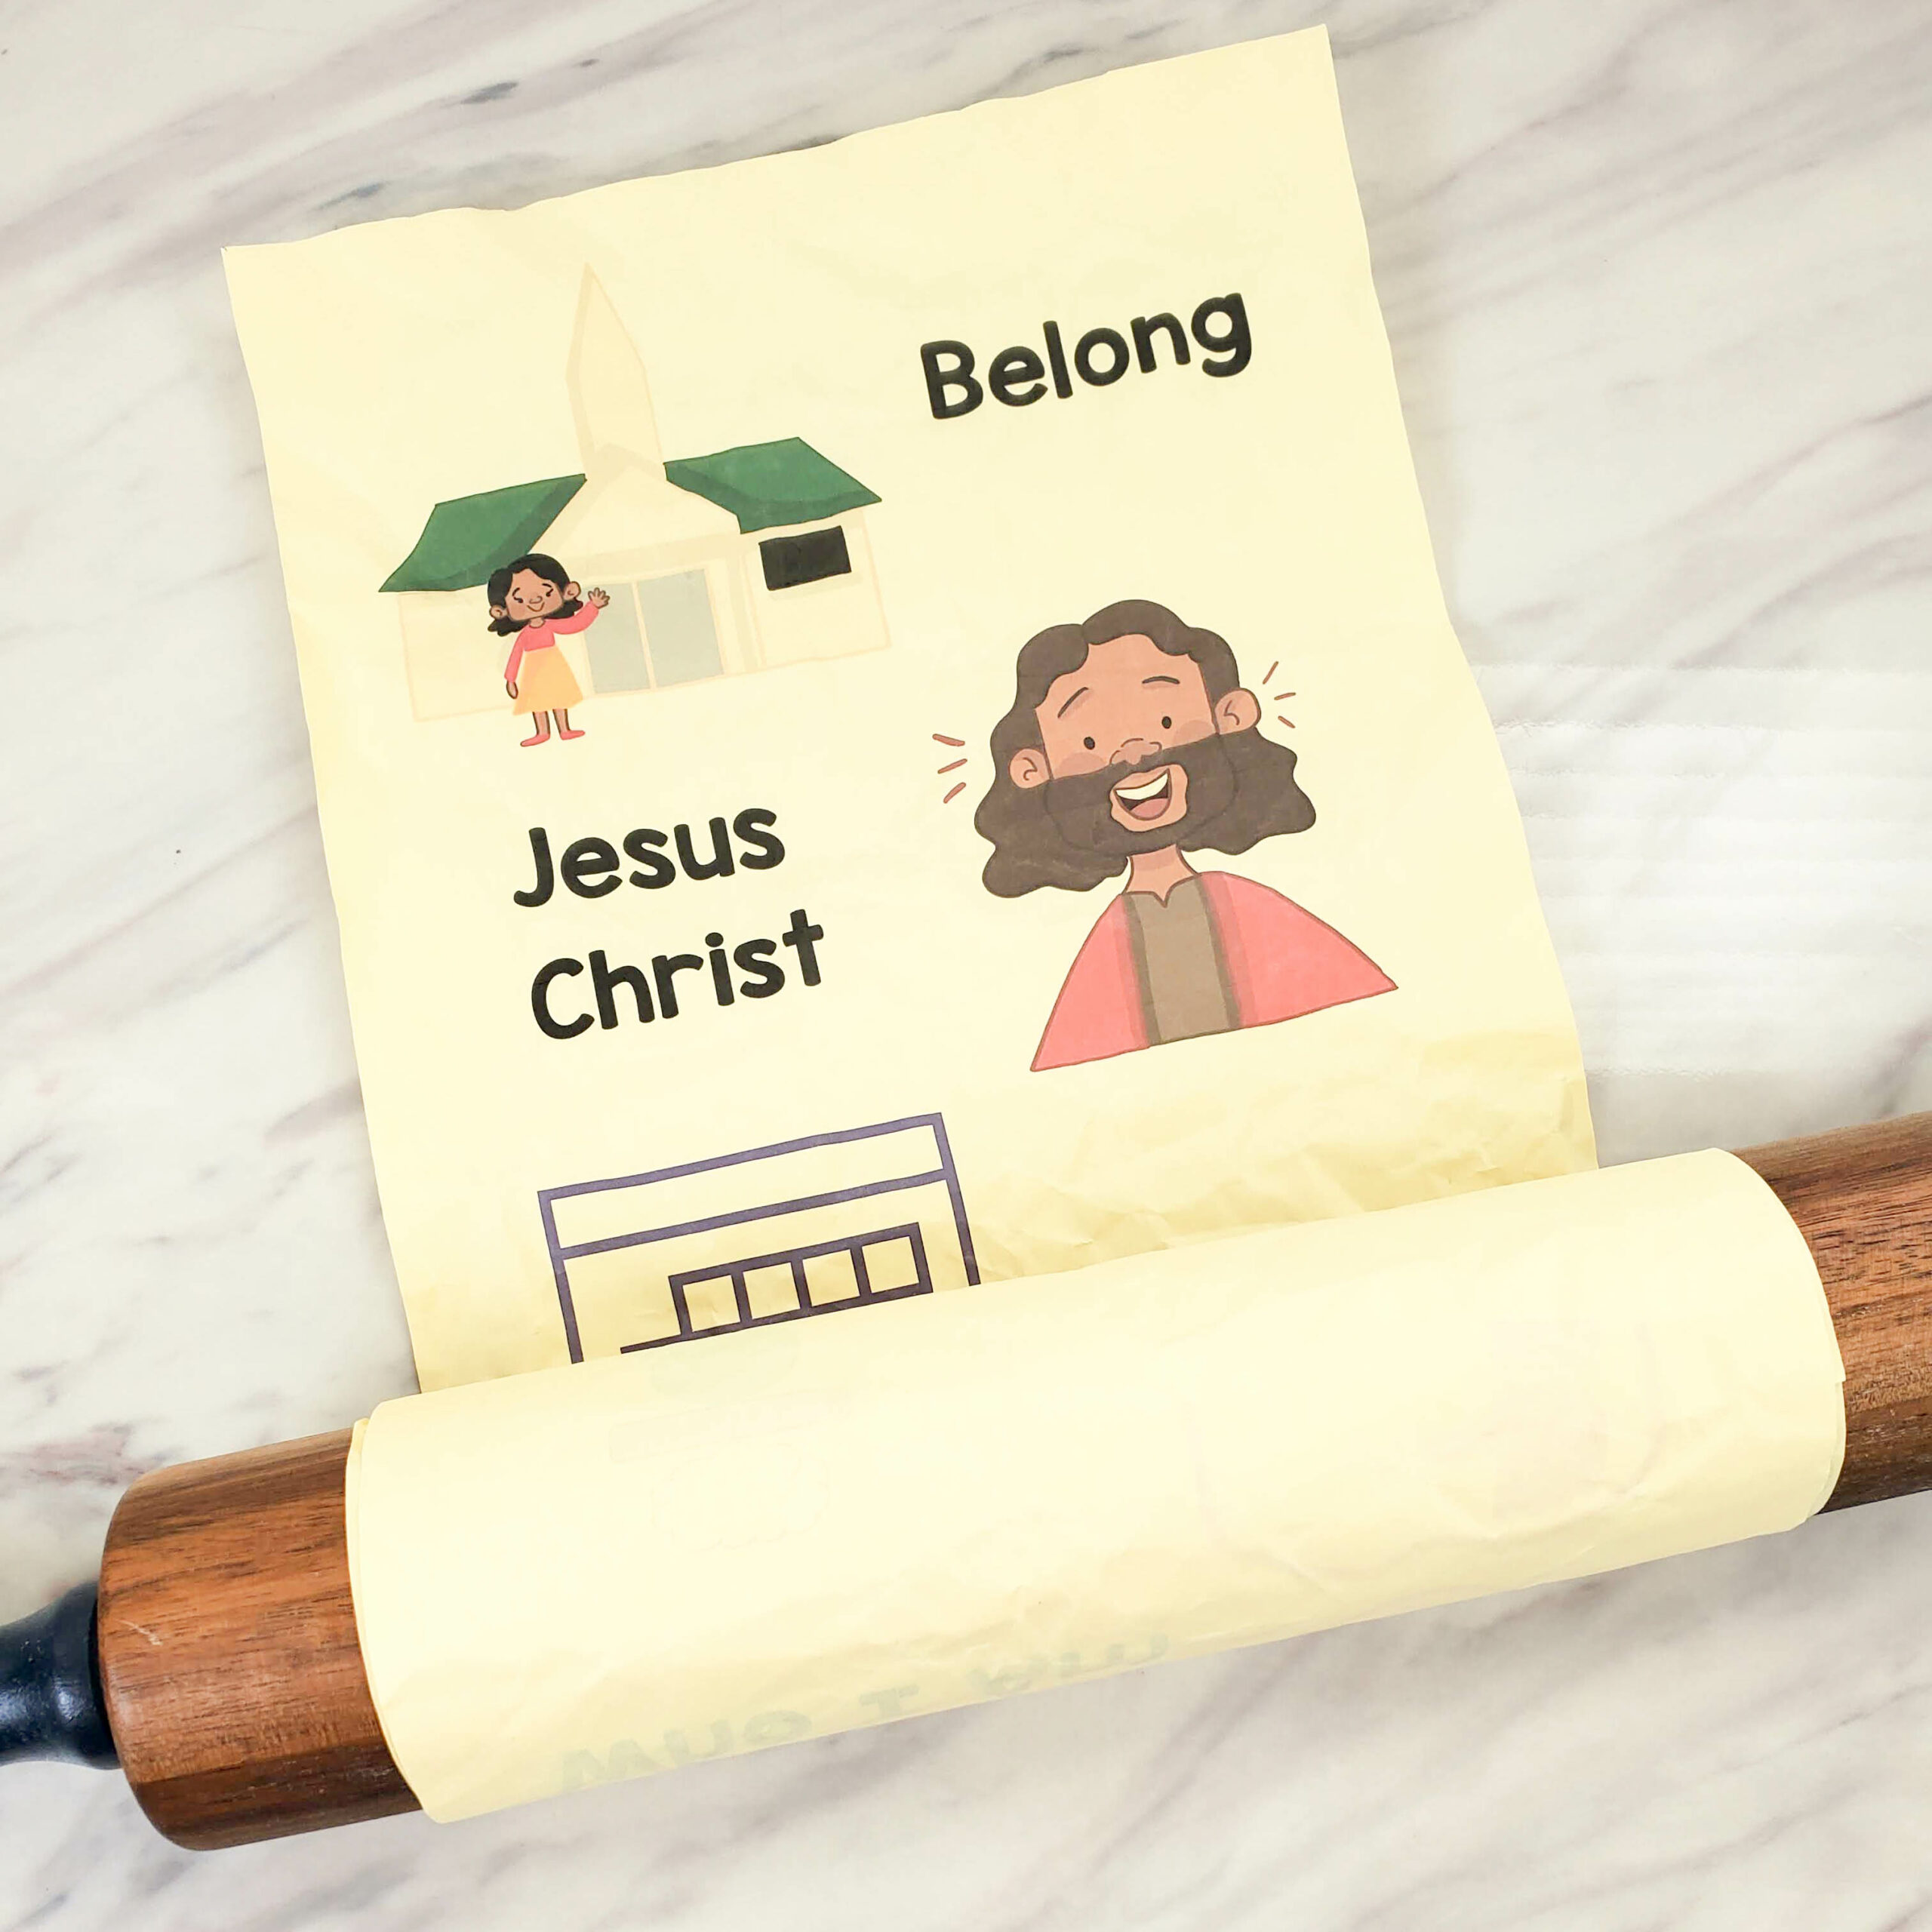 Teach the beloved song The Church of Jesus Christ with this creative and fun Song scroll singing time activity! You'll unwind the scroll as you sing line by line with a cute graphic and keyword to match each line of the song. Fun for families or for LDS Primary music leaders teaching this song.